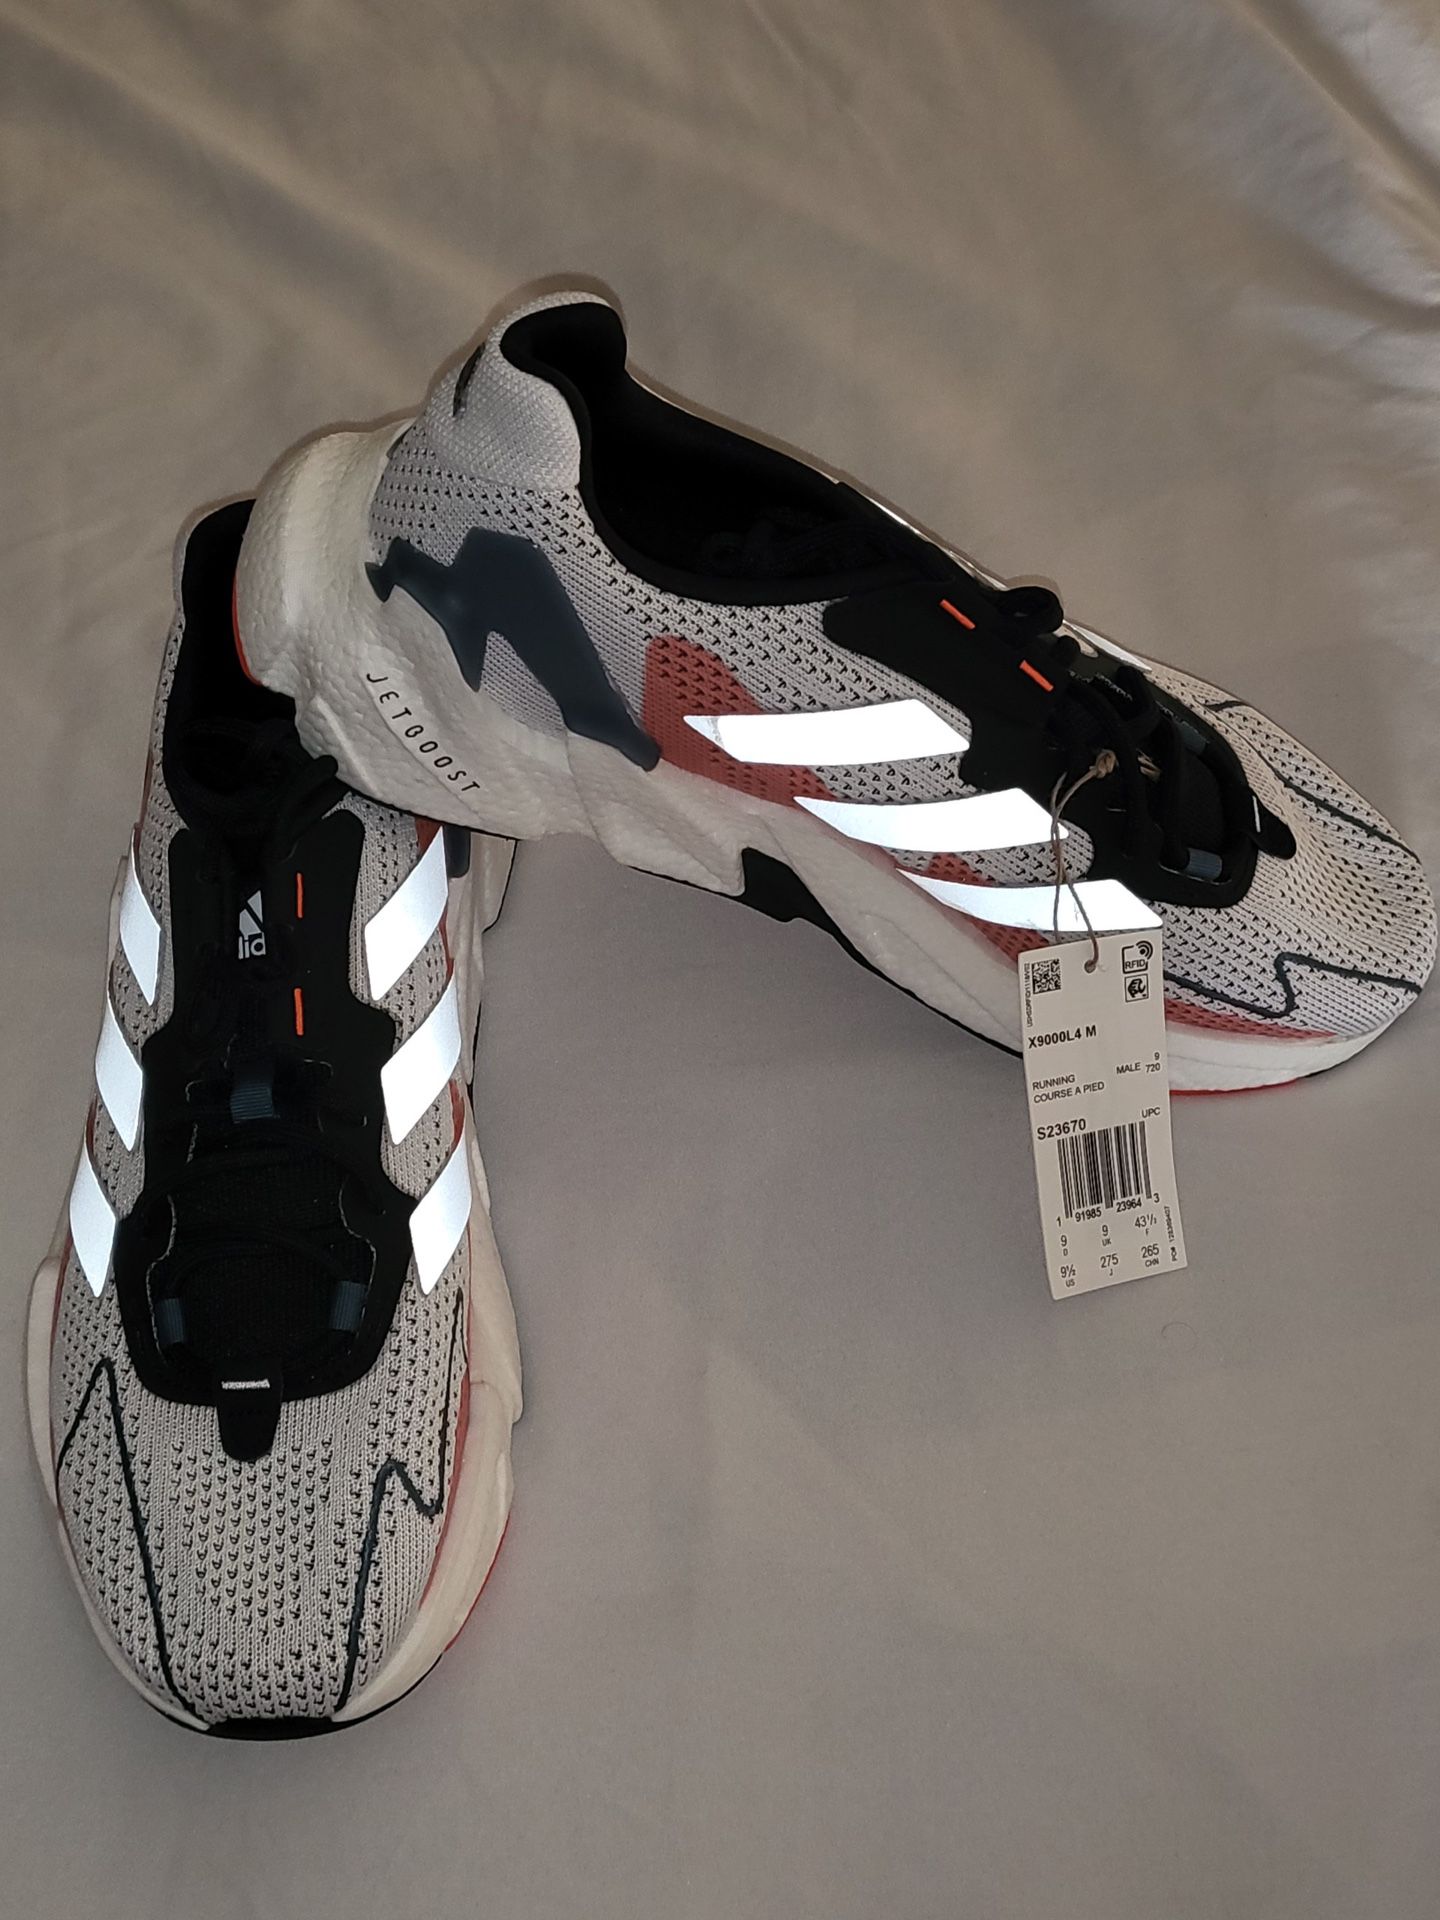 Adidas XL9000L4 WHITE SOLAR RED for Sale in Elizabethtown, KY - OfferUp